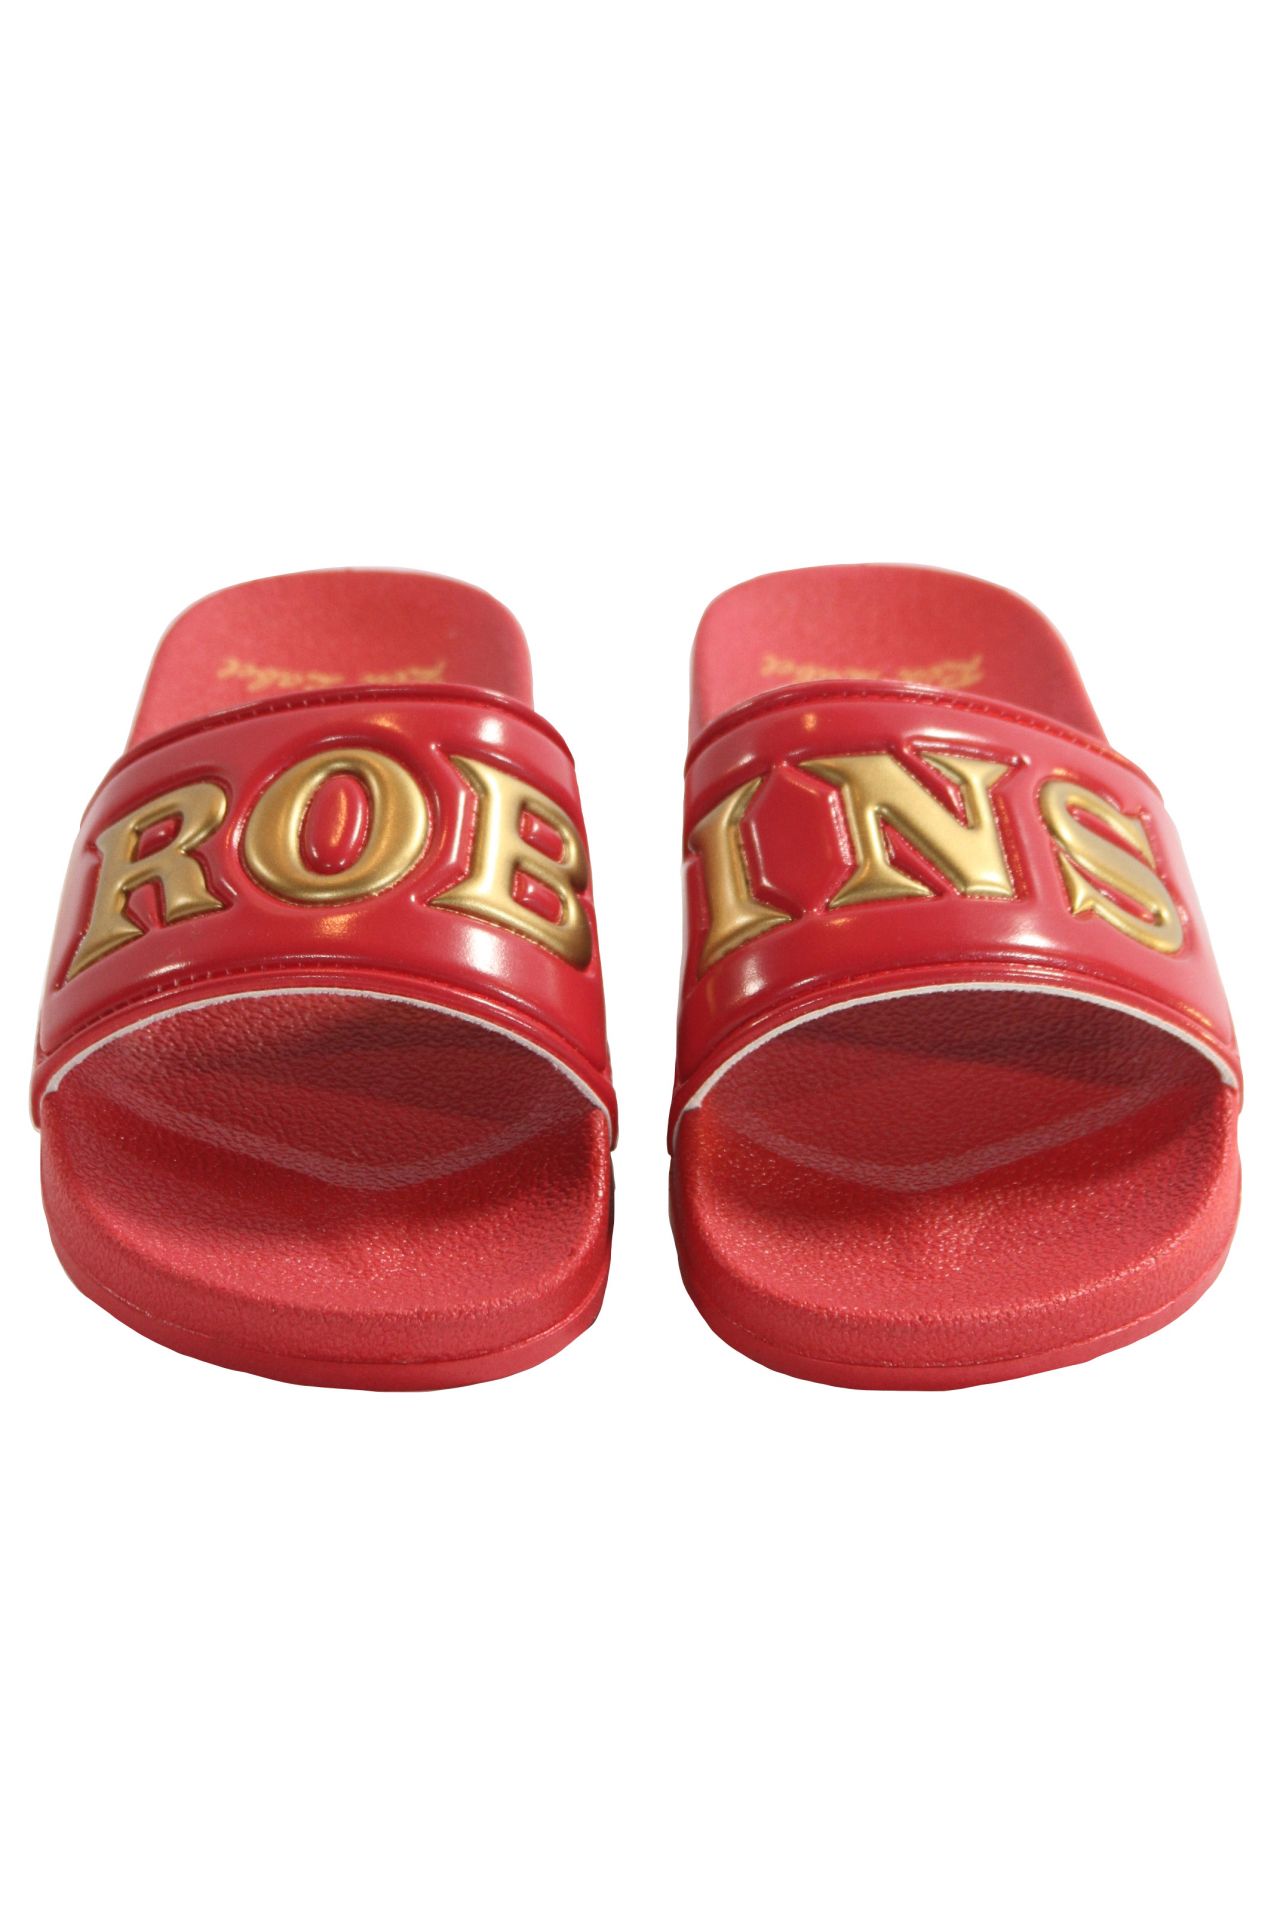 ROBIN SLIDES IN RED AND GOLD